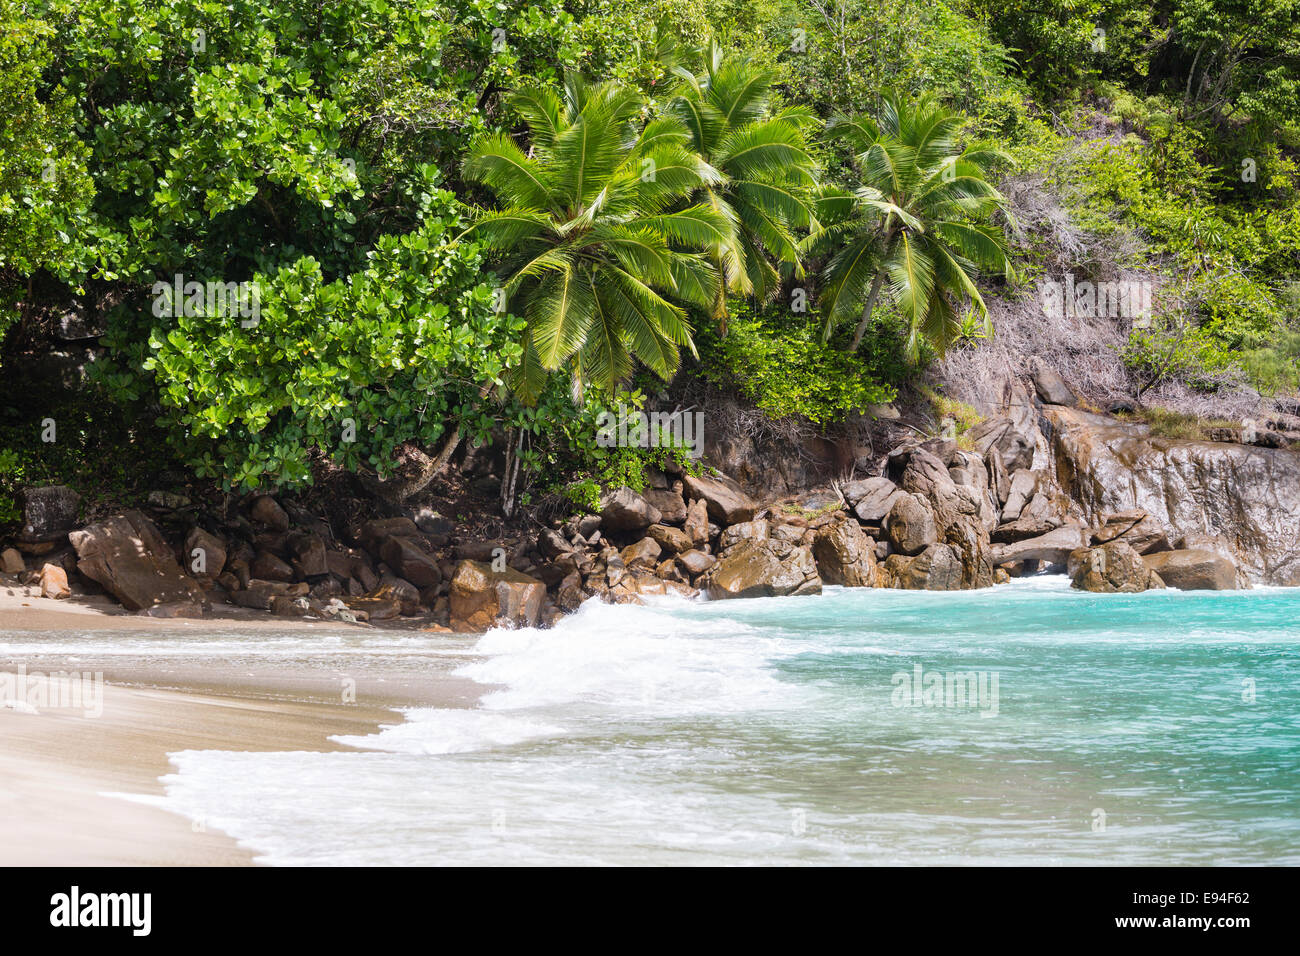 Anse Major in the west of Mahe, Seychelles Stock Photo